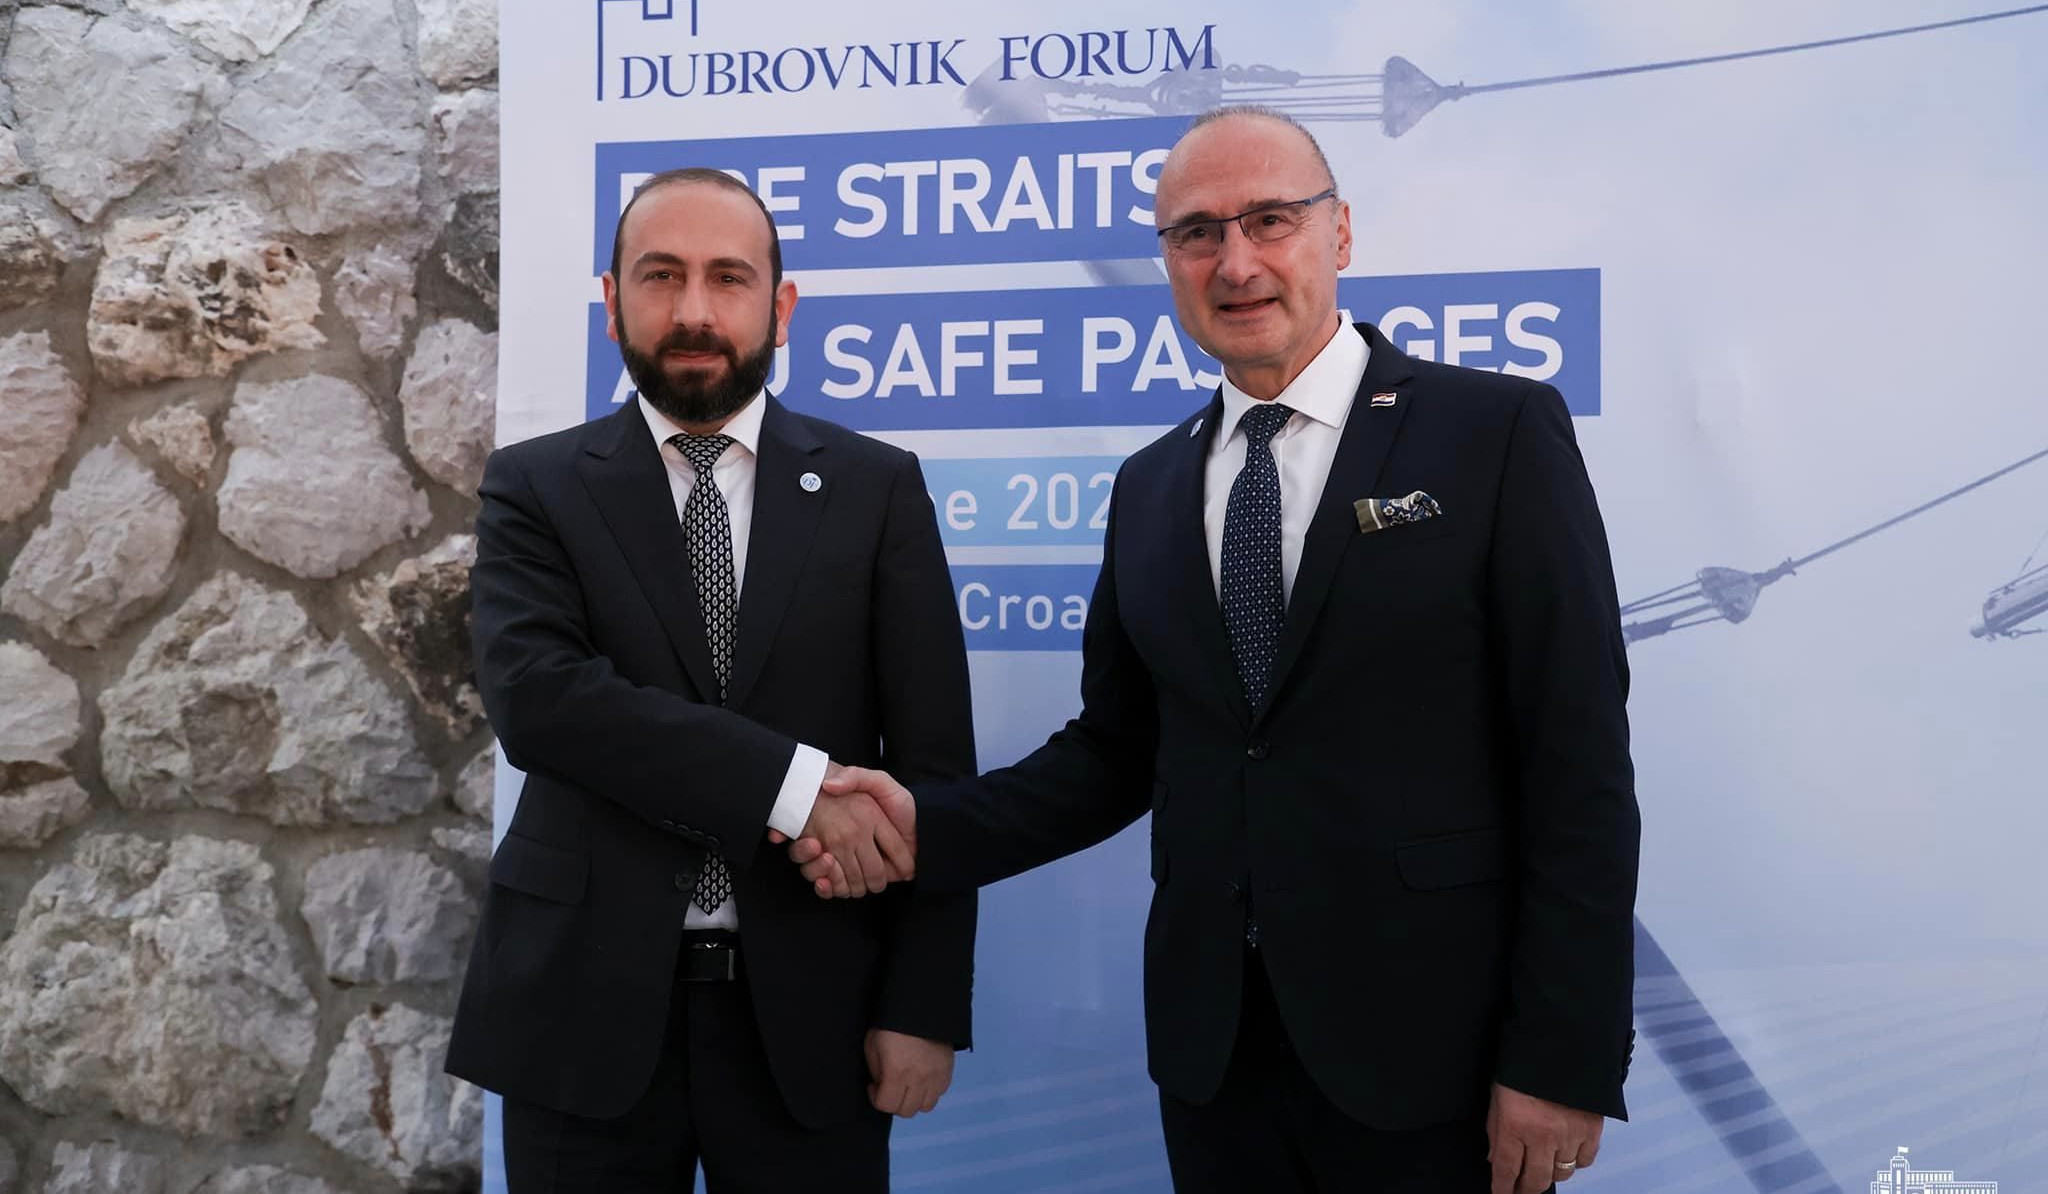 Minister of Foreign Affairs participated in official reception of launch of Dubrovnik Forum